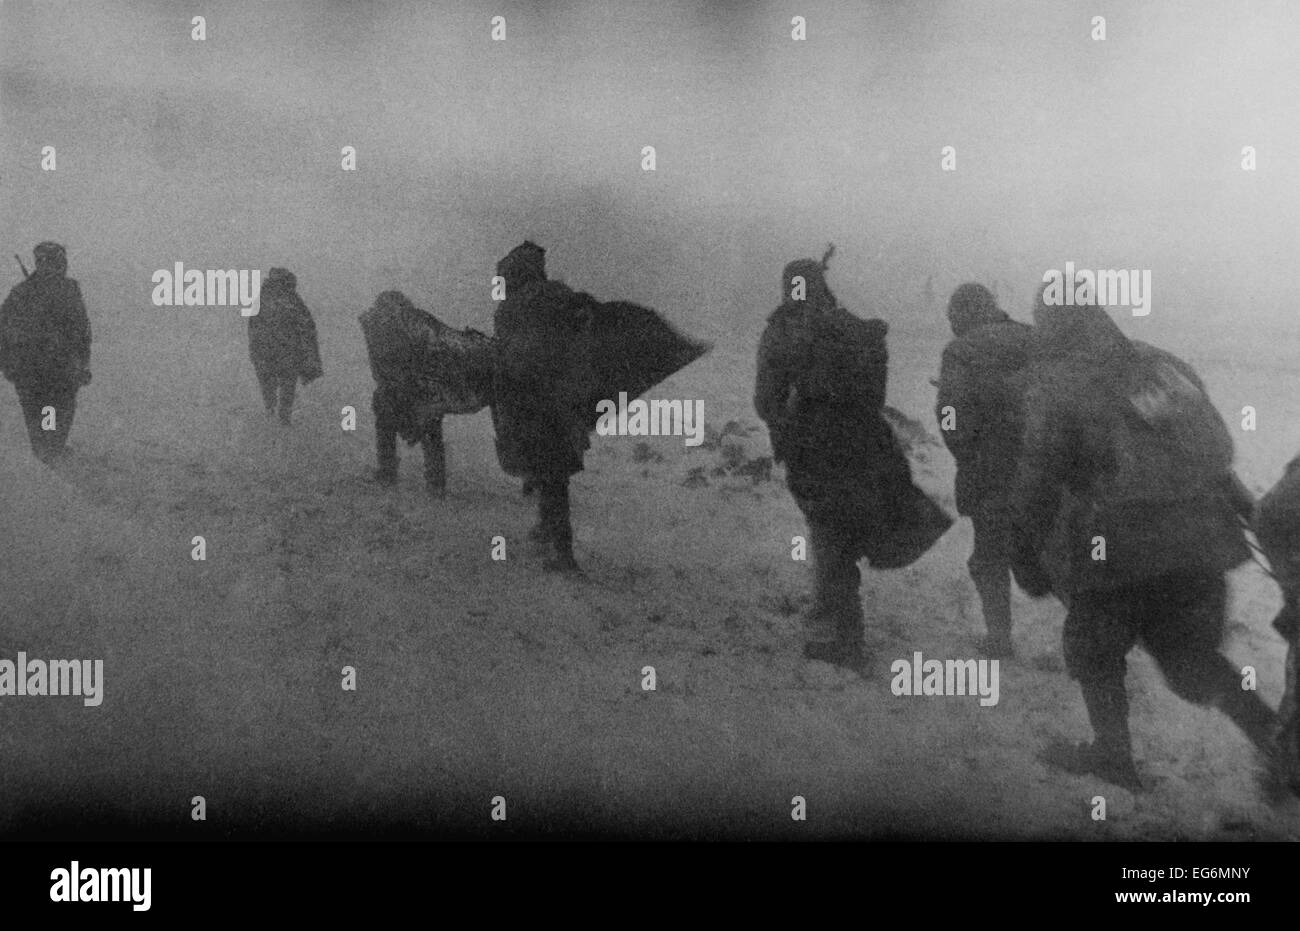 Soviet soldiers marching in blowing snow in 1944. World War 2 photograph by Georgi Zelma is entitled, 'Spring'. Stock Photo